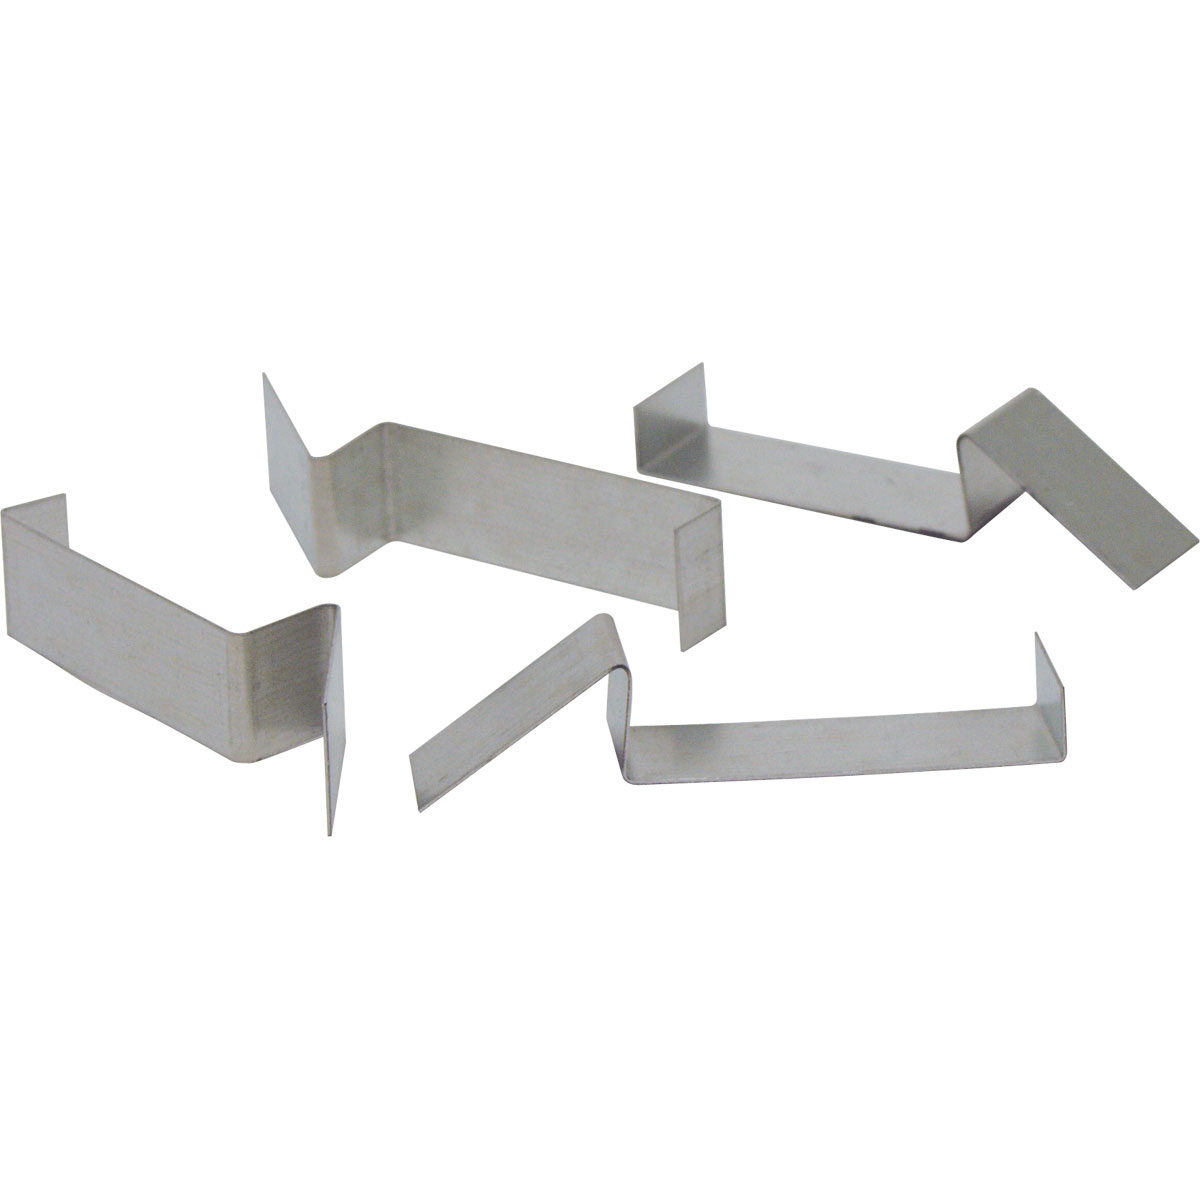 Furring channel mounting clips for bar hanger for use with Recessed Housings.